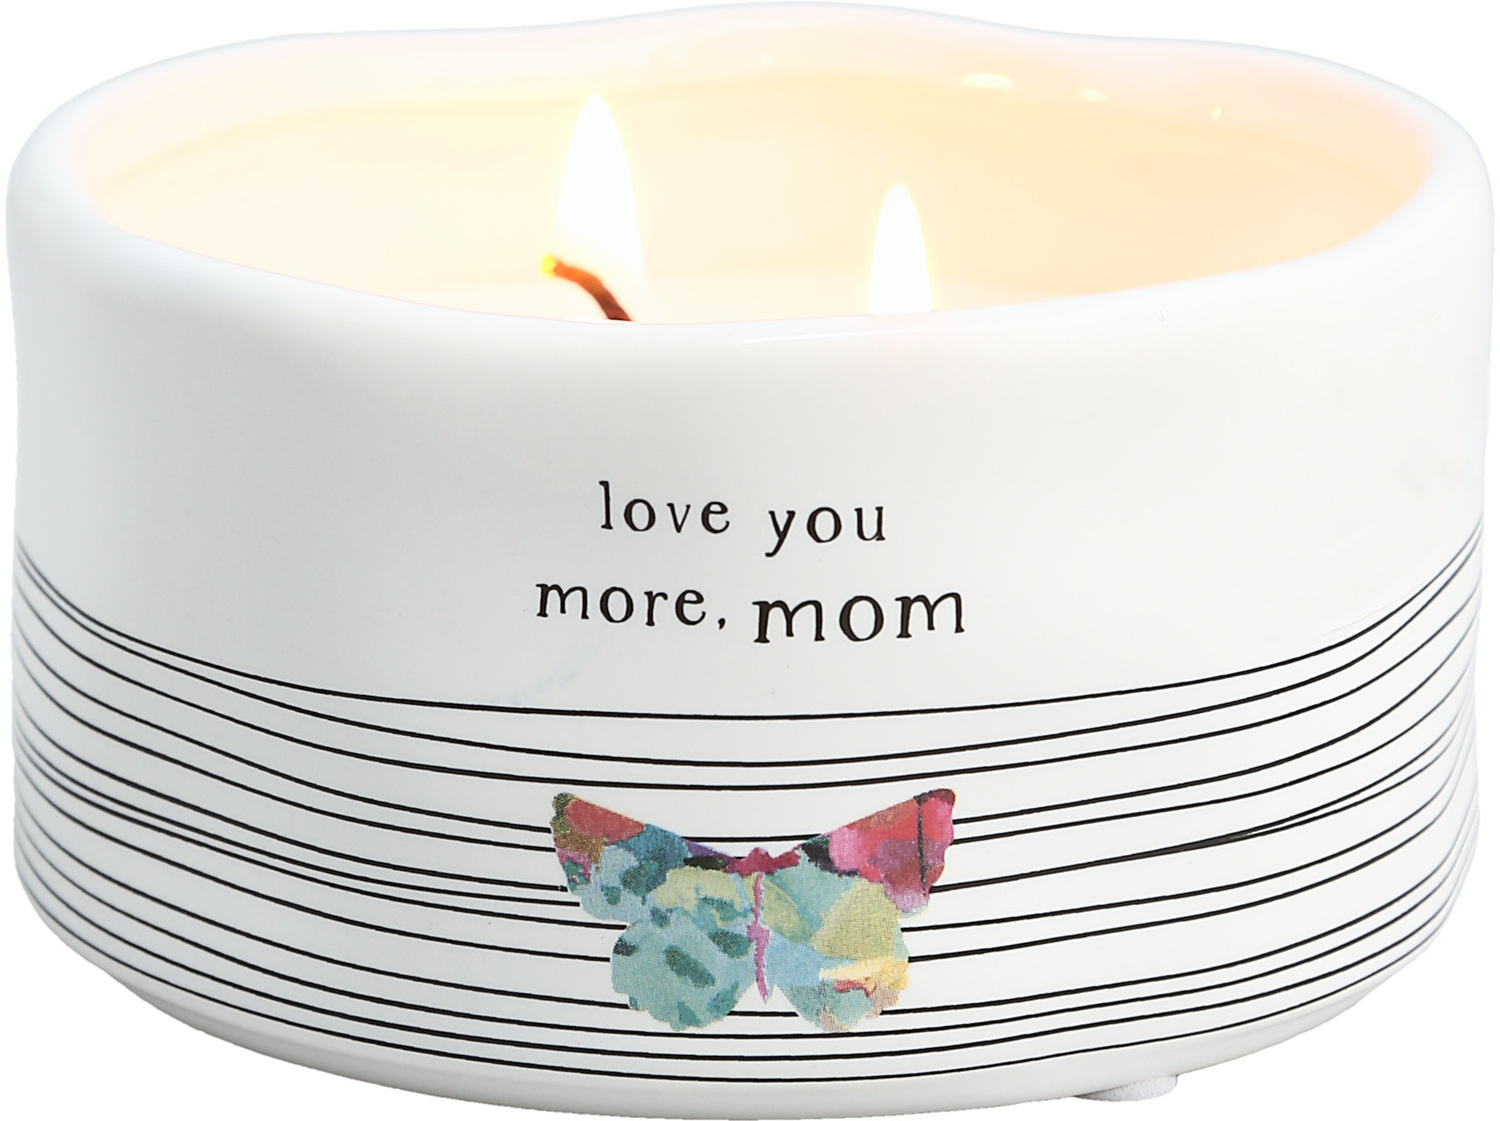 Mom by Celebrating You - Mom - 8 oz - 100% Soy Wax Candle Scent: Tranquility